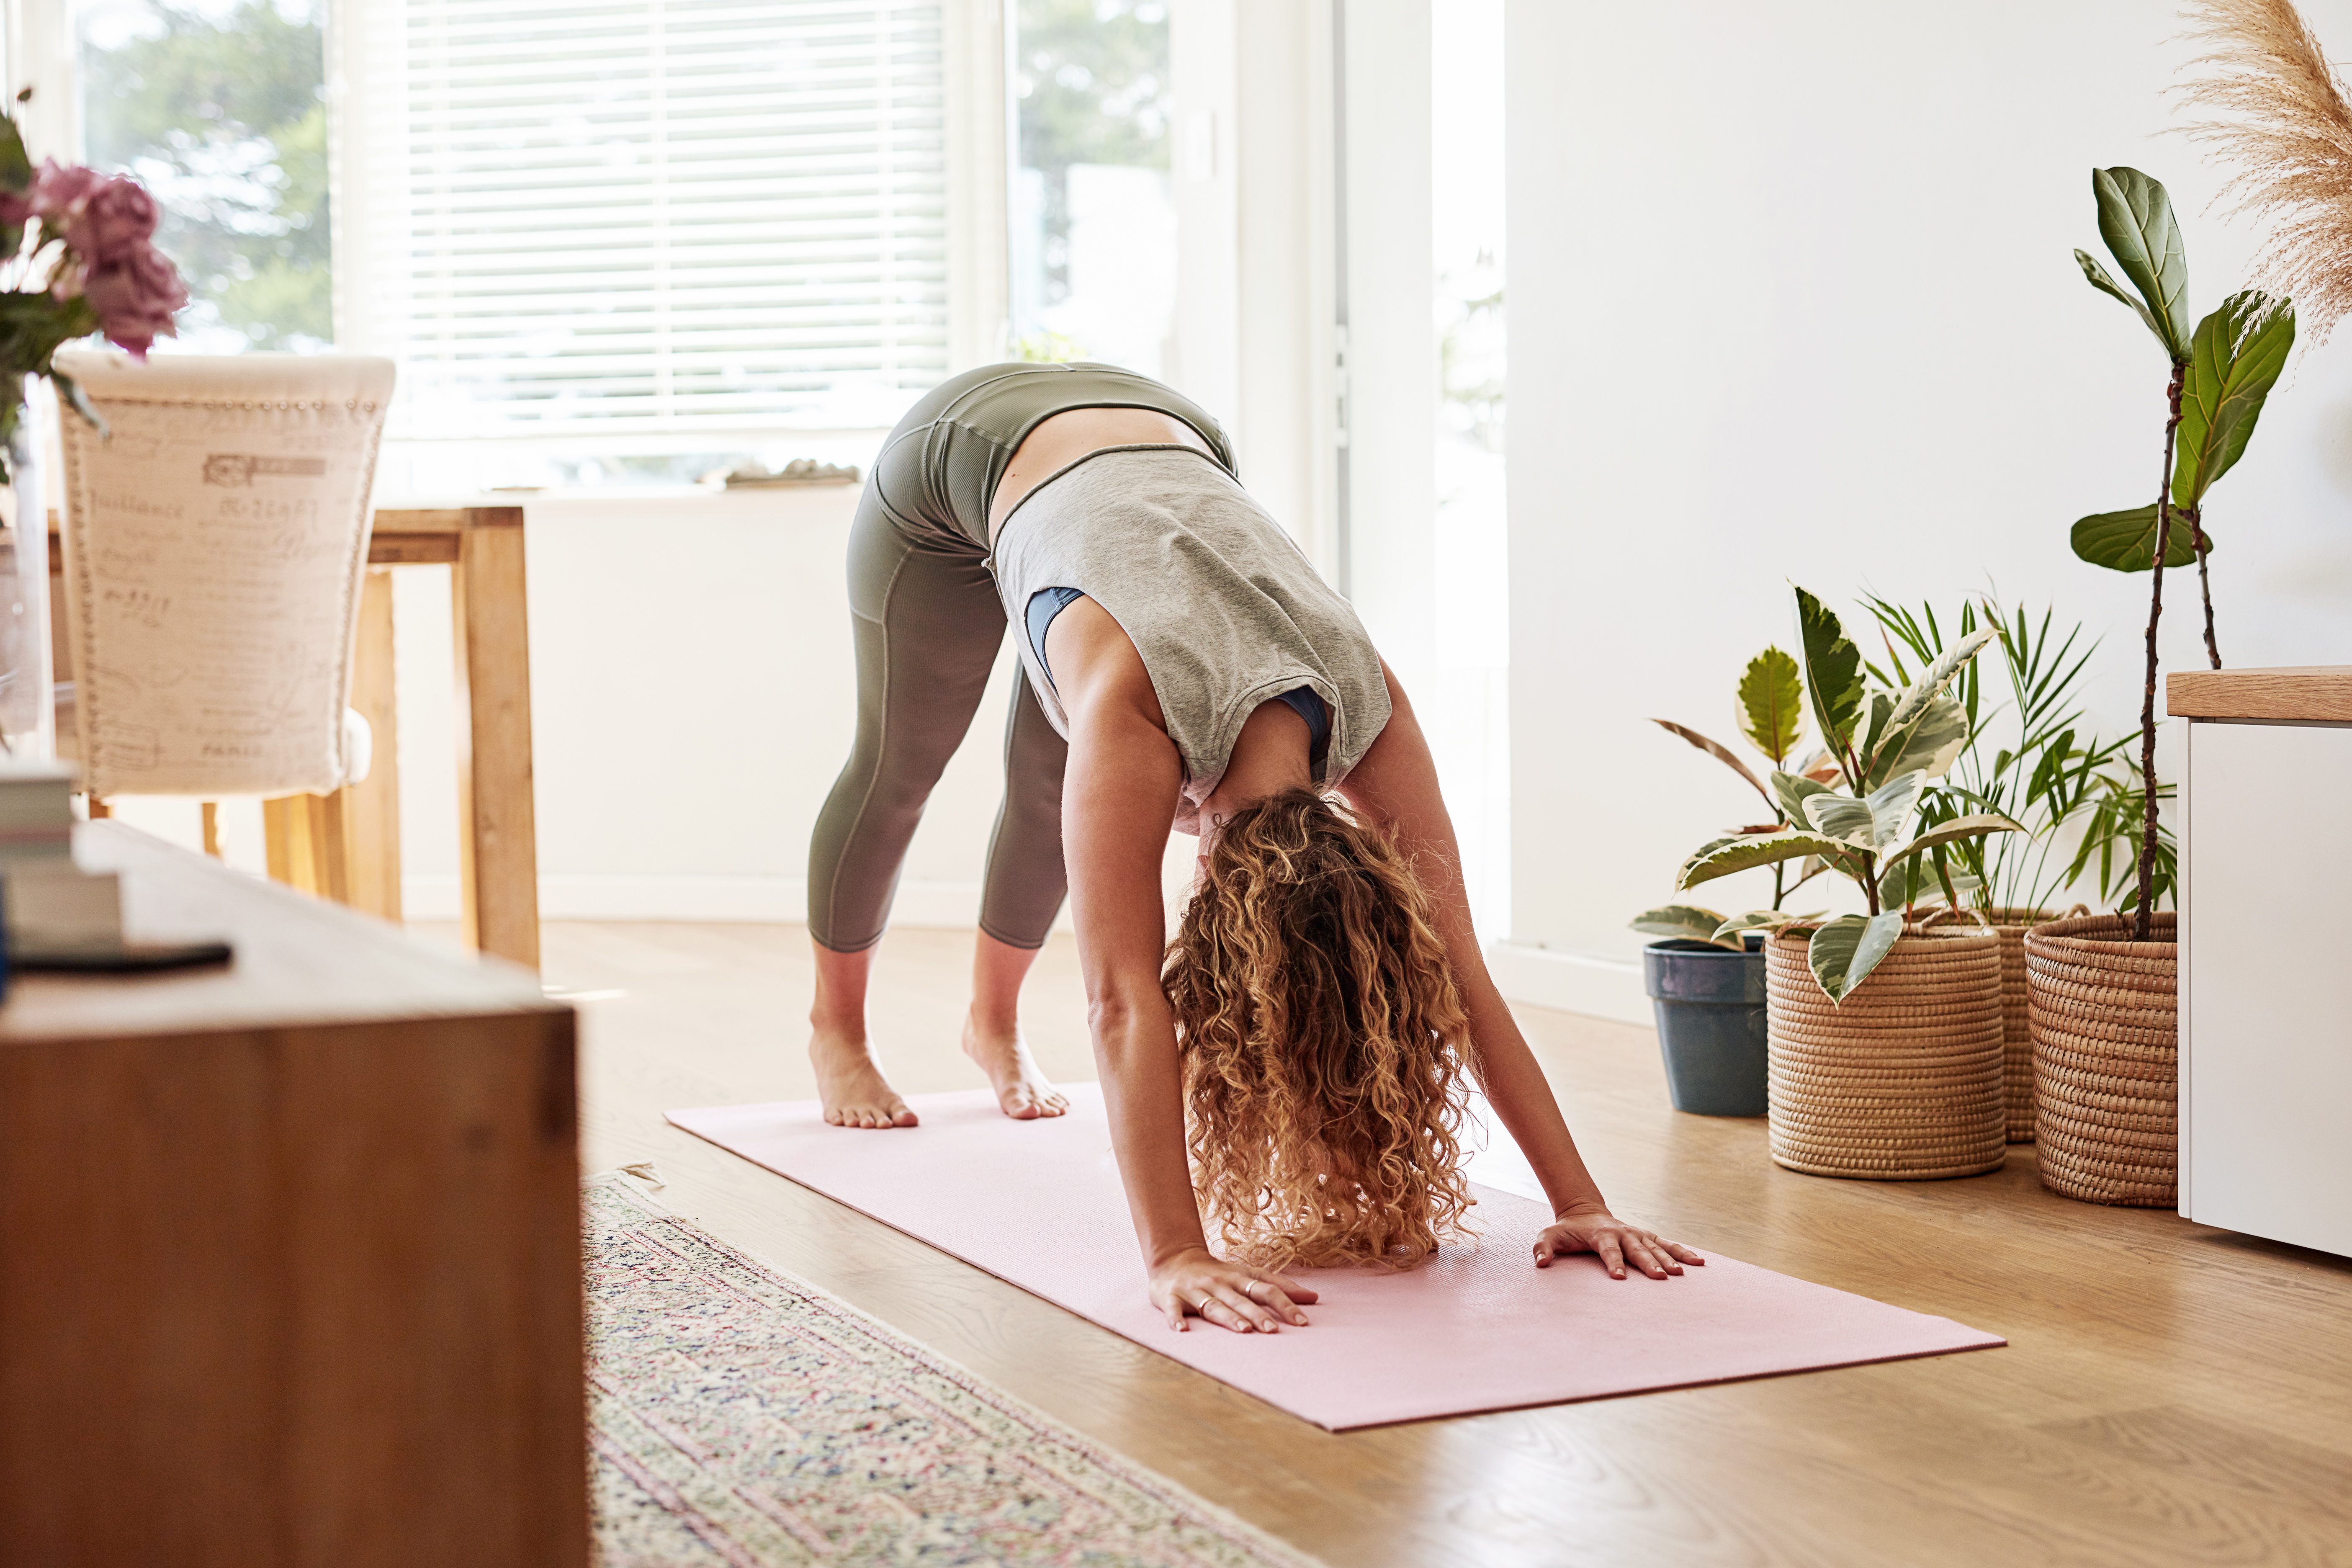 How to Strengthen Your Chaturanga — Alo Moves